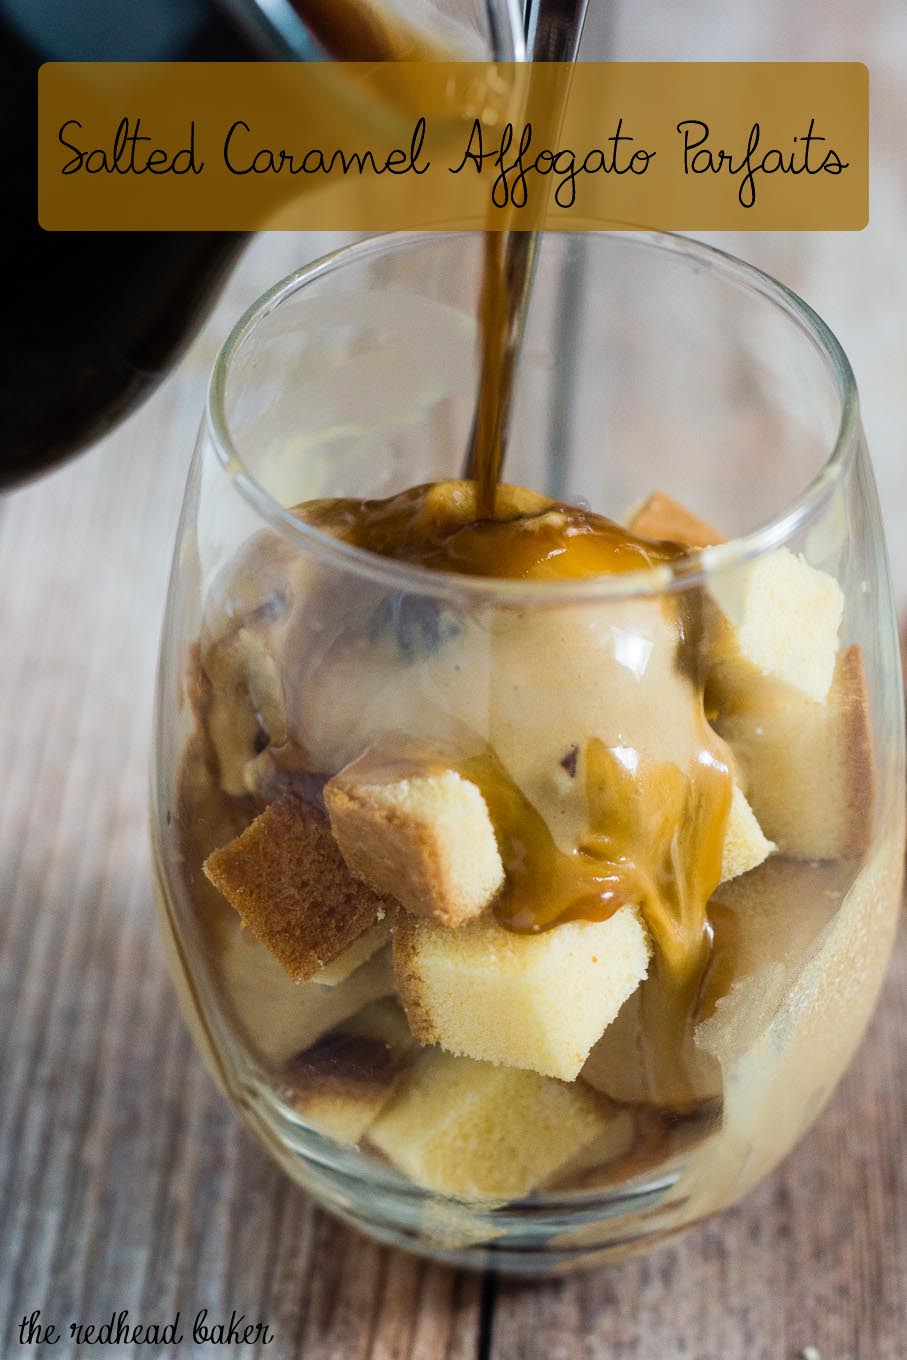 Salted Caramel Affogato Parfaits combine gelato, coffee and pound cake for a grown-up dessert with lots of different flavors and textures, perfect for any celebration.